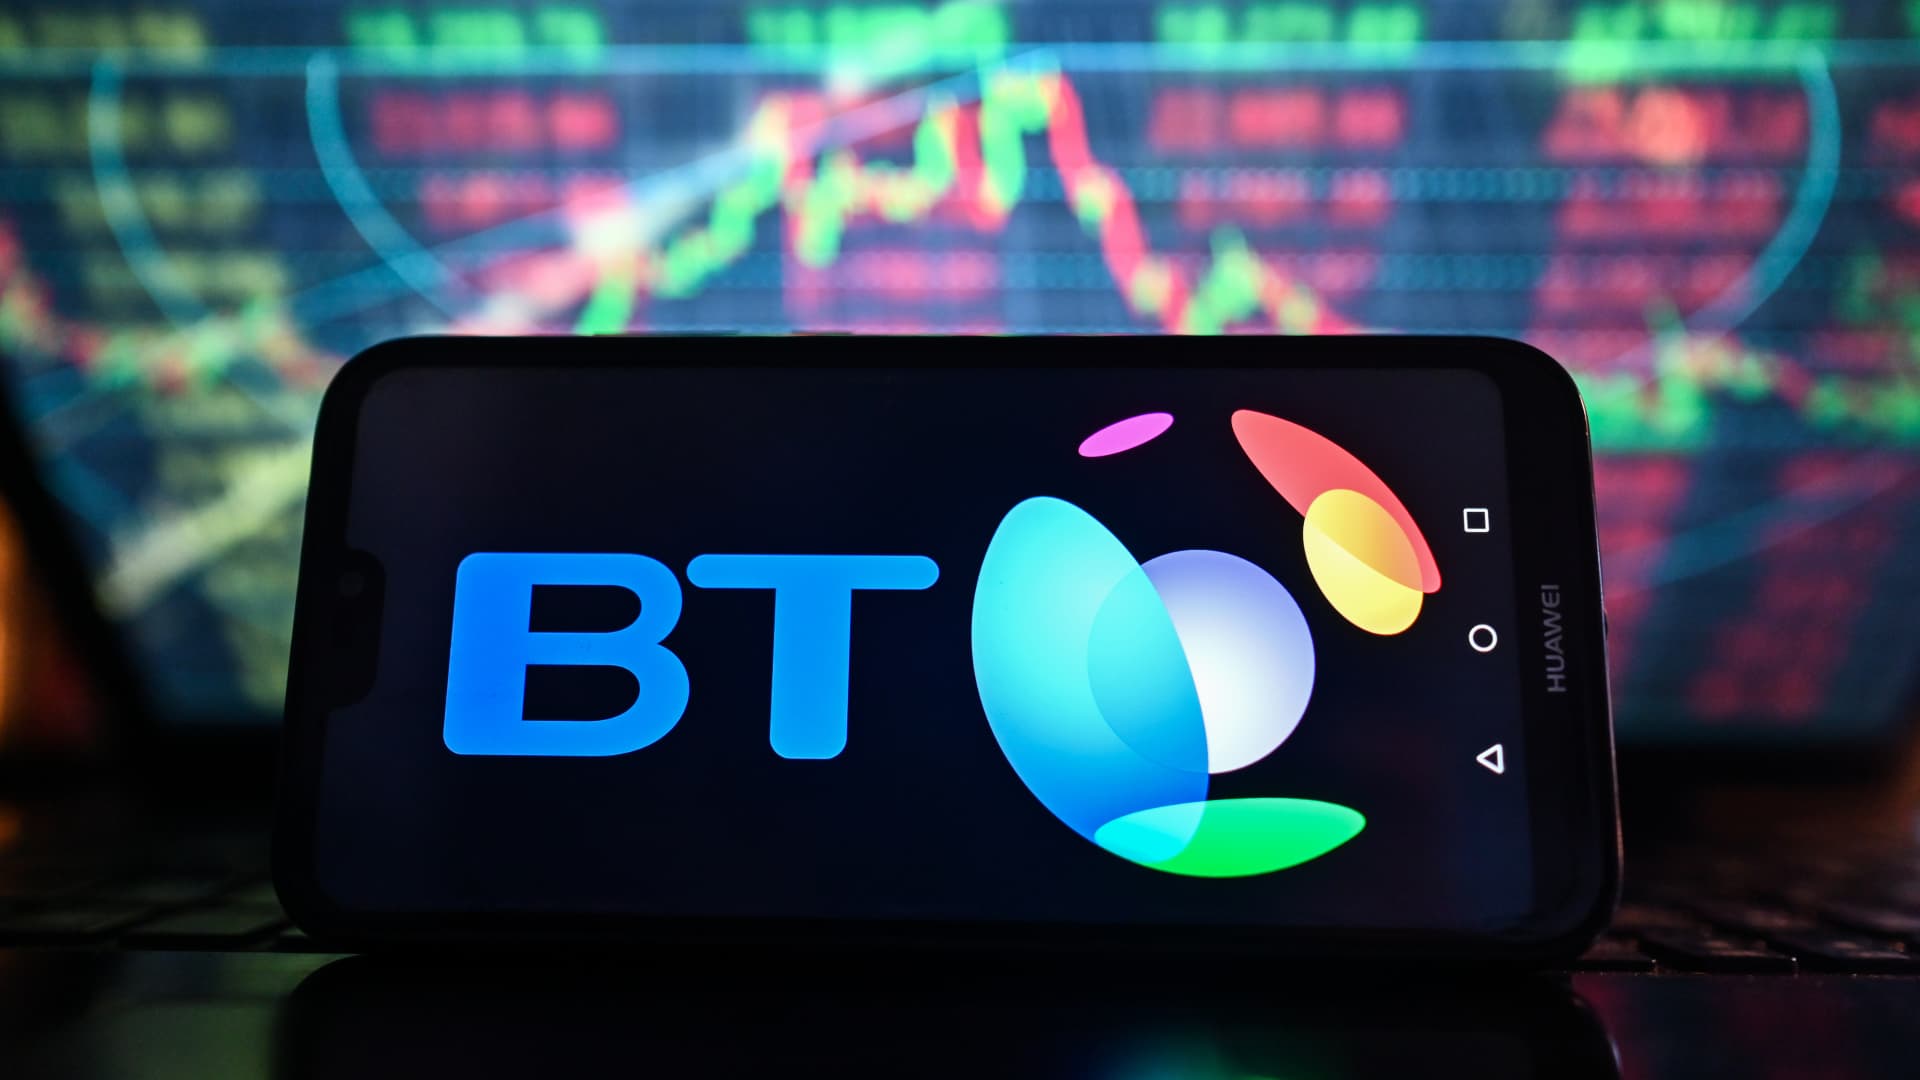 Telecoms giant BT Group appoints Allison Kirkby as CEO